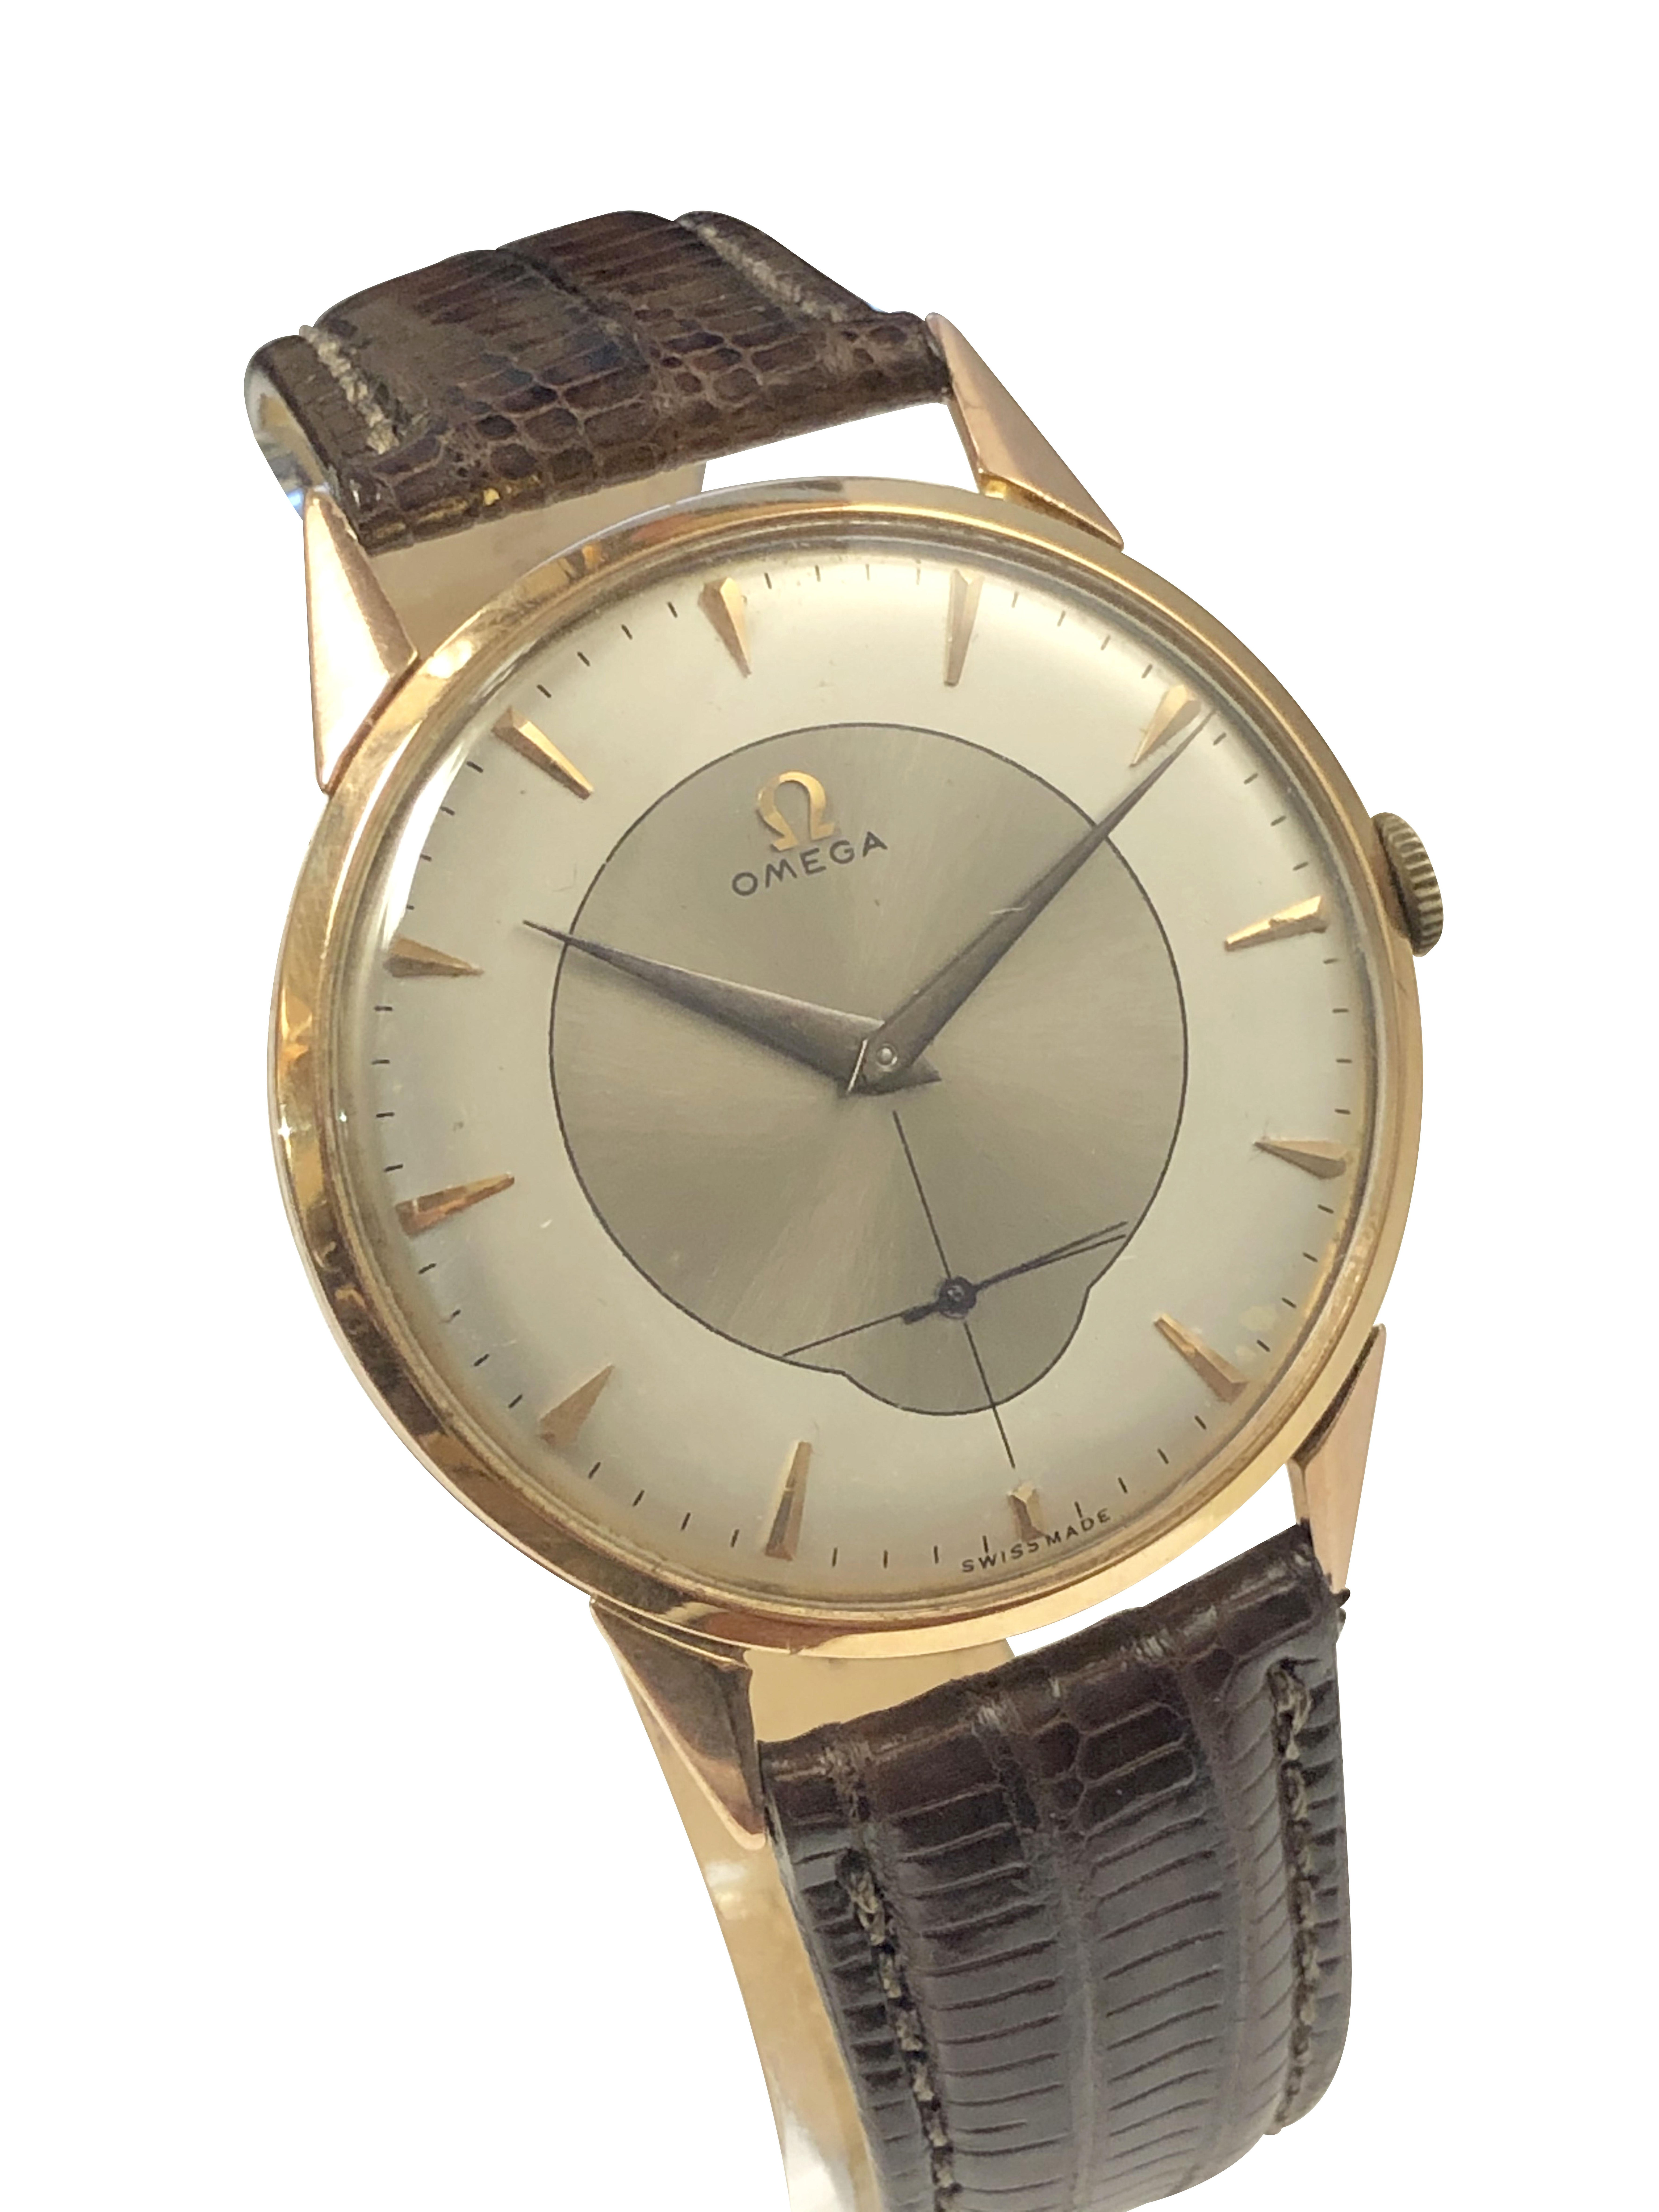 Circa 1940s Omega Wrist Watch for the South American market, 37 M.M. 18K Rose Gold 3 piece case, this is an all original watch with a non Omega signed case made specifically for the south American Market.  Omega caliber 265, 15 jewel Gilt lever